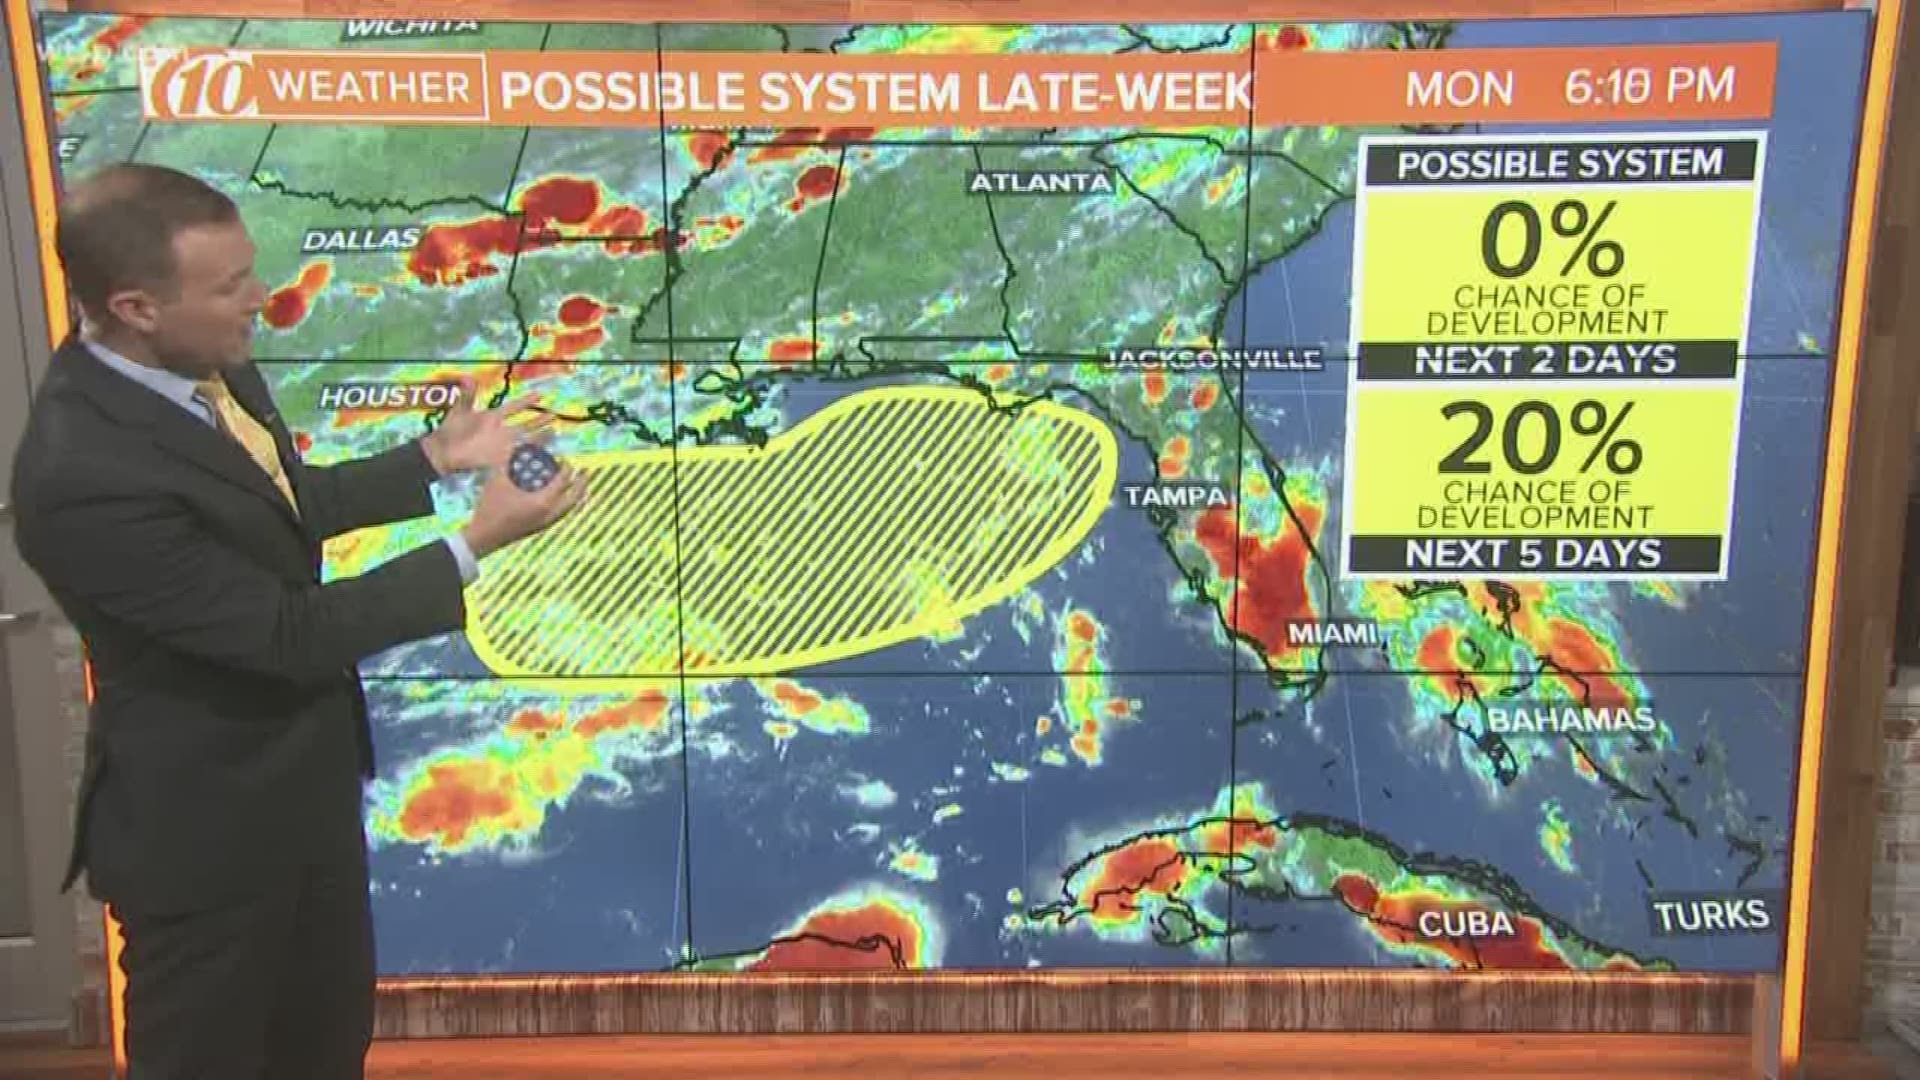 There is a 20-percent chance for a system developing in the Gulf of Mexico in the next five days.